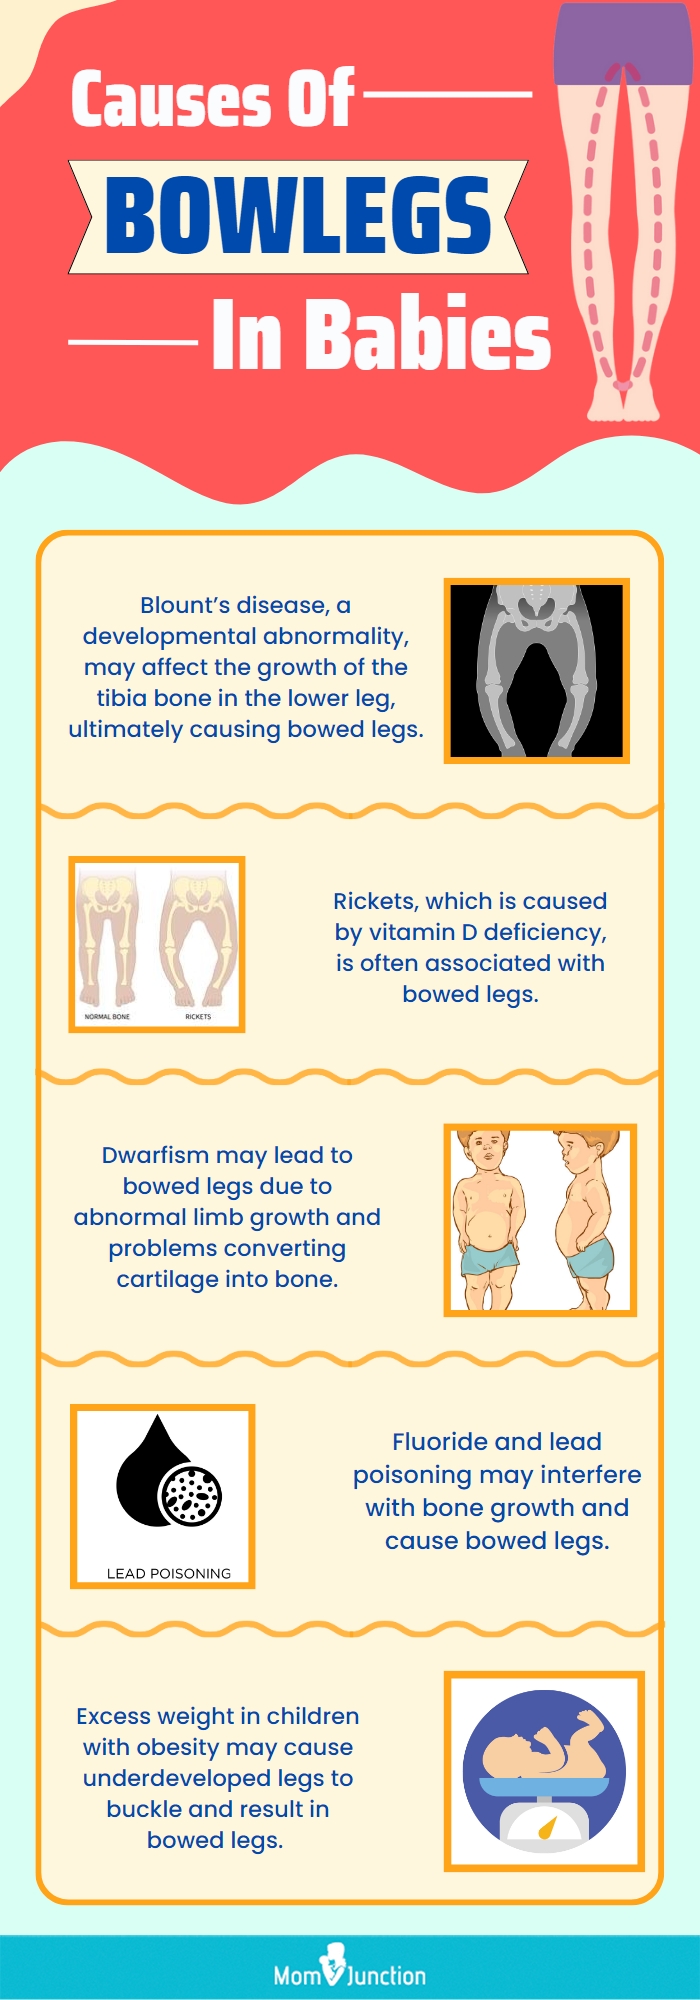 causes of bowlegs in babies (infographic)